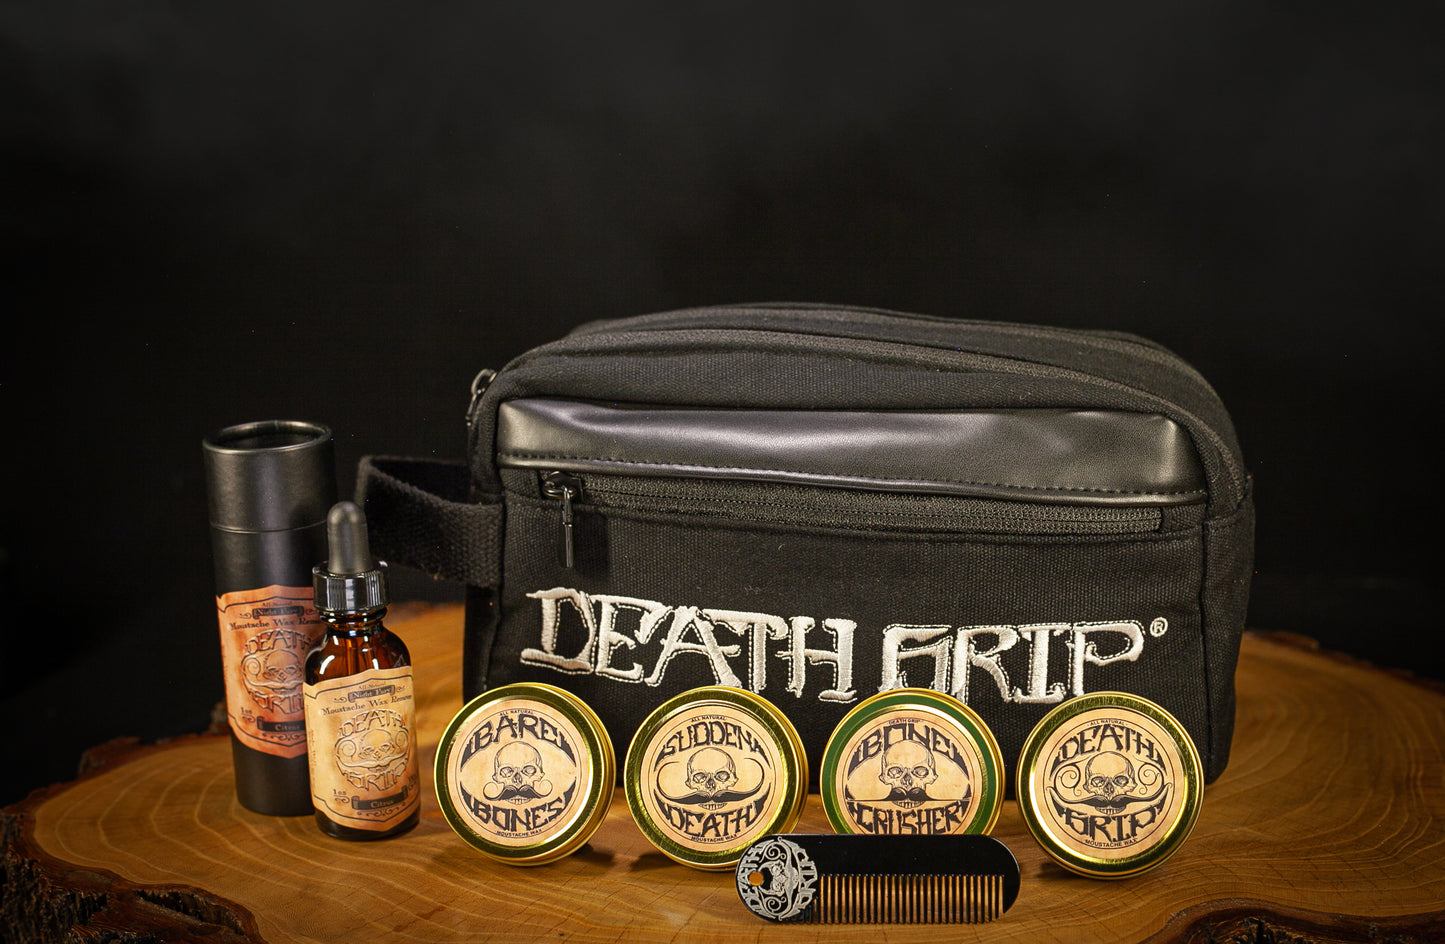 Mustache Kit w/ Small Travel Bag, 4 Mustache Waxes, 1 Pocket Comb, and Night Fury Mustache Wax Remover Oil